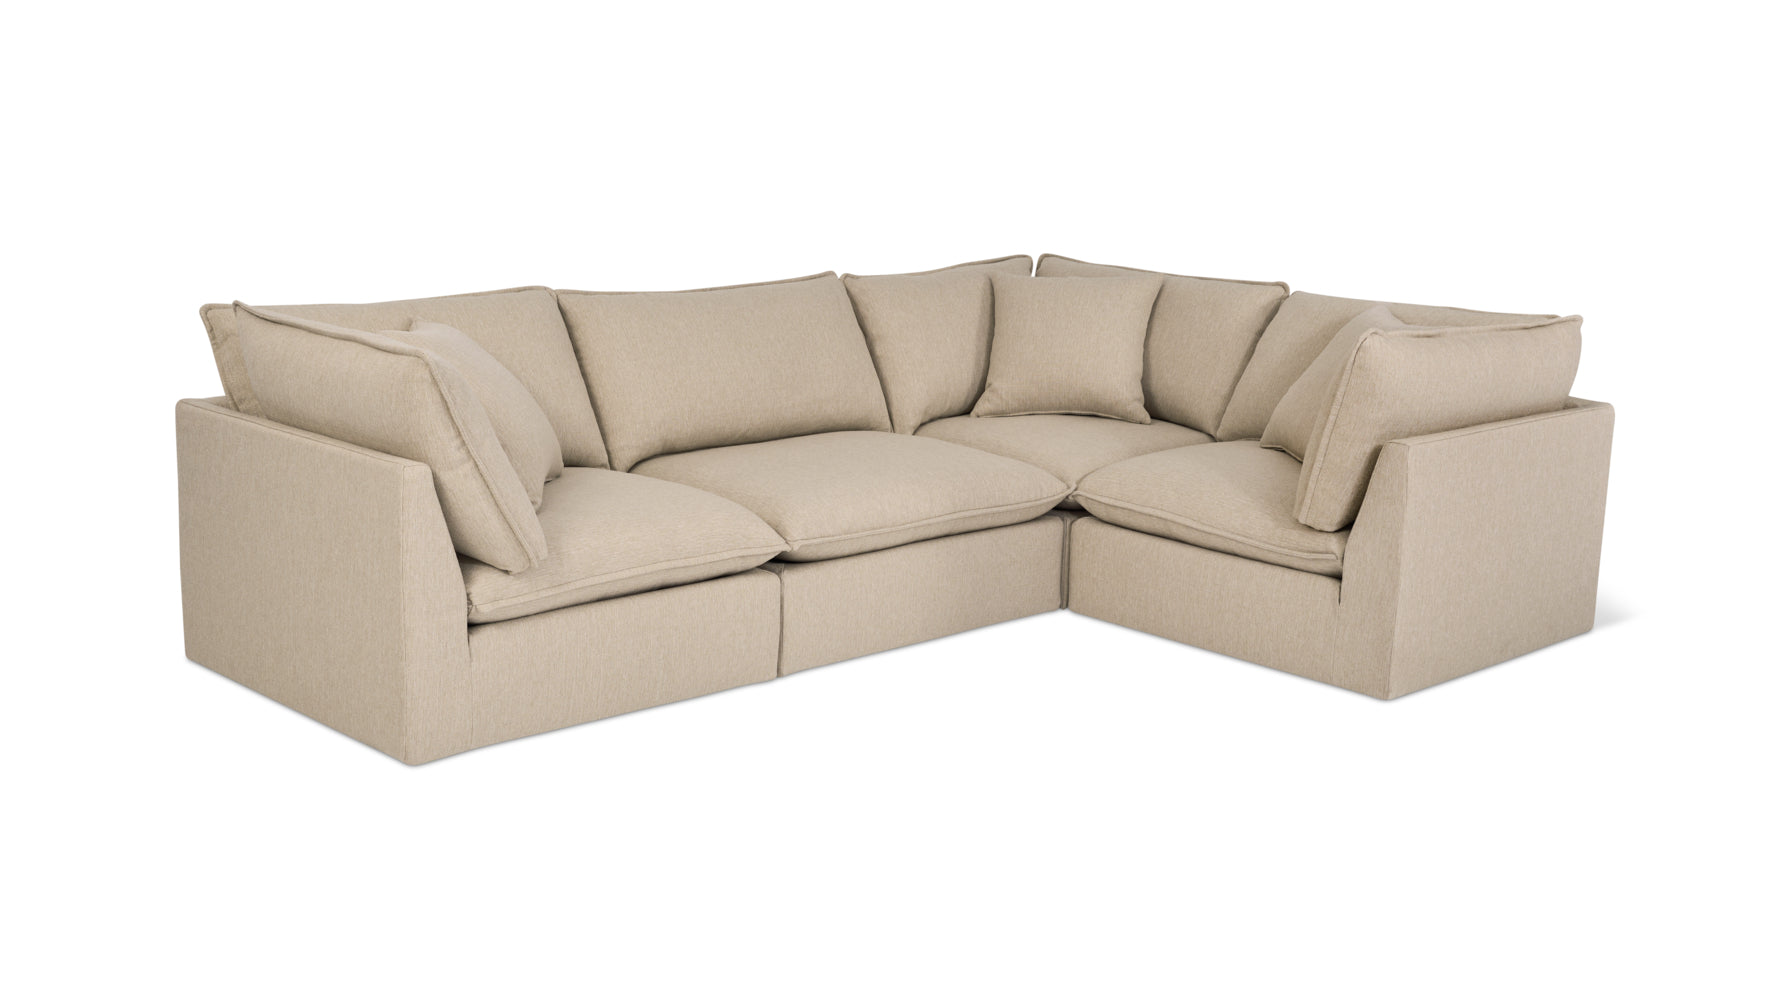 Chill Time 4-Piece Modular Sectional Closed, Biscuit - Image 2